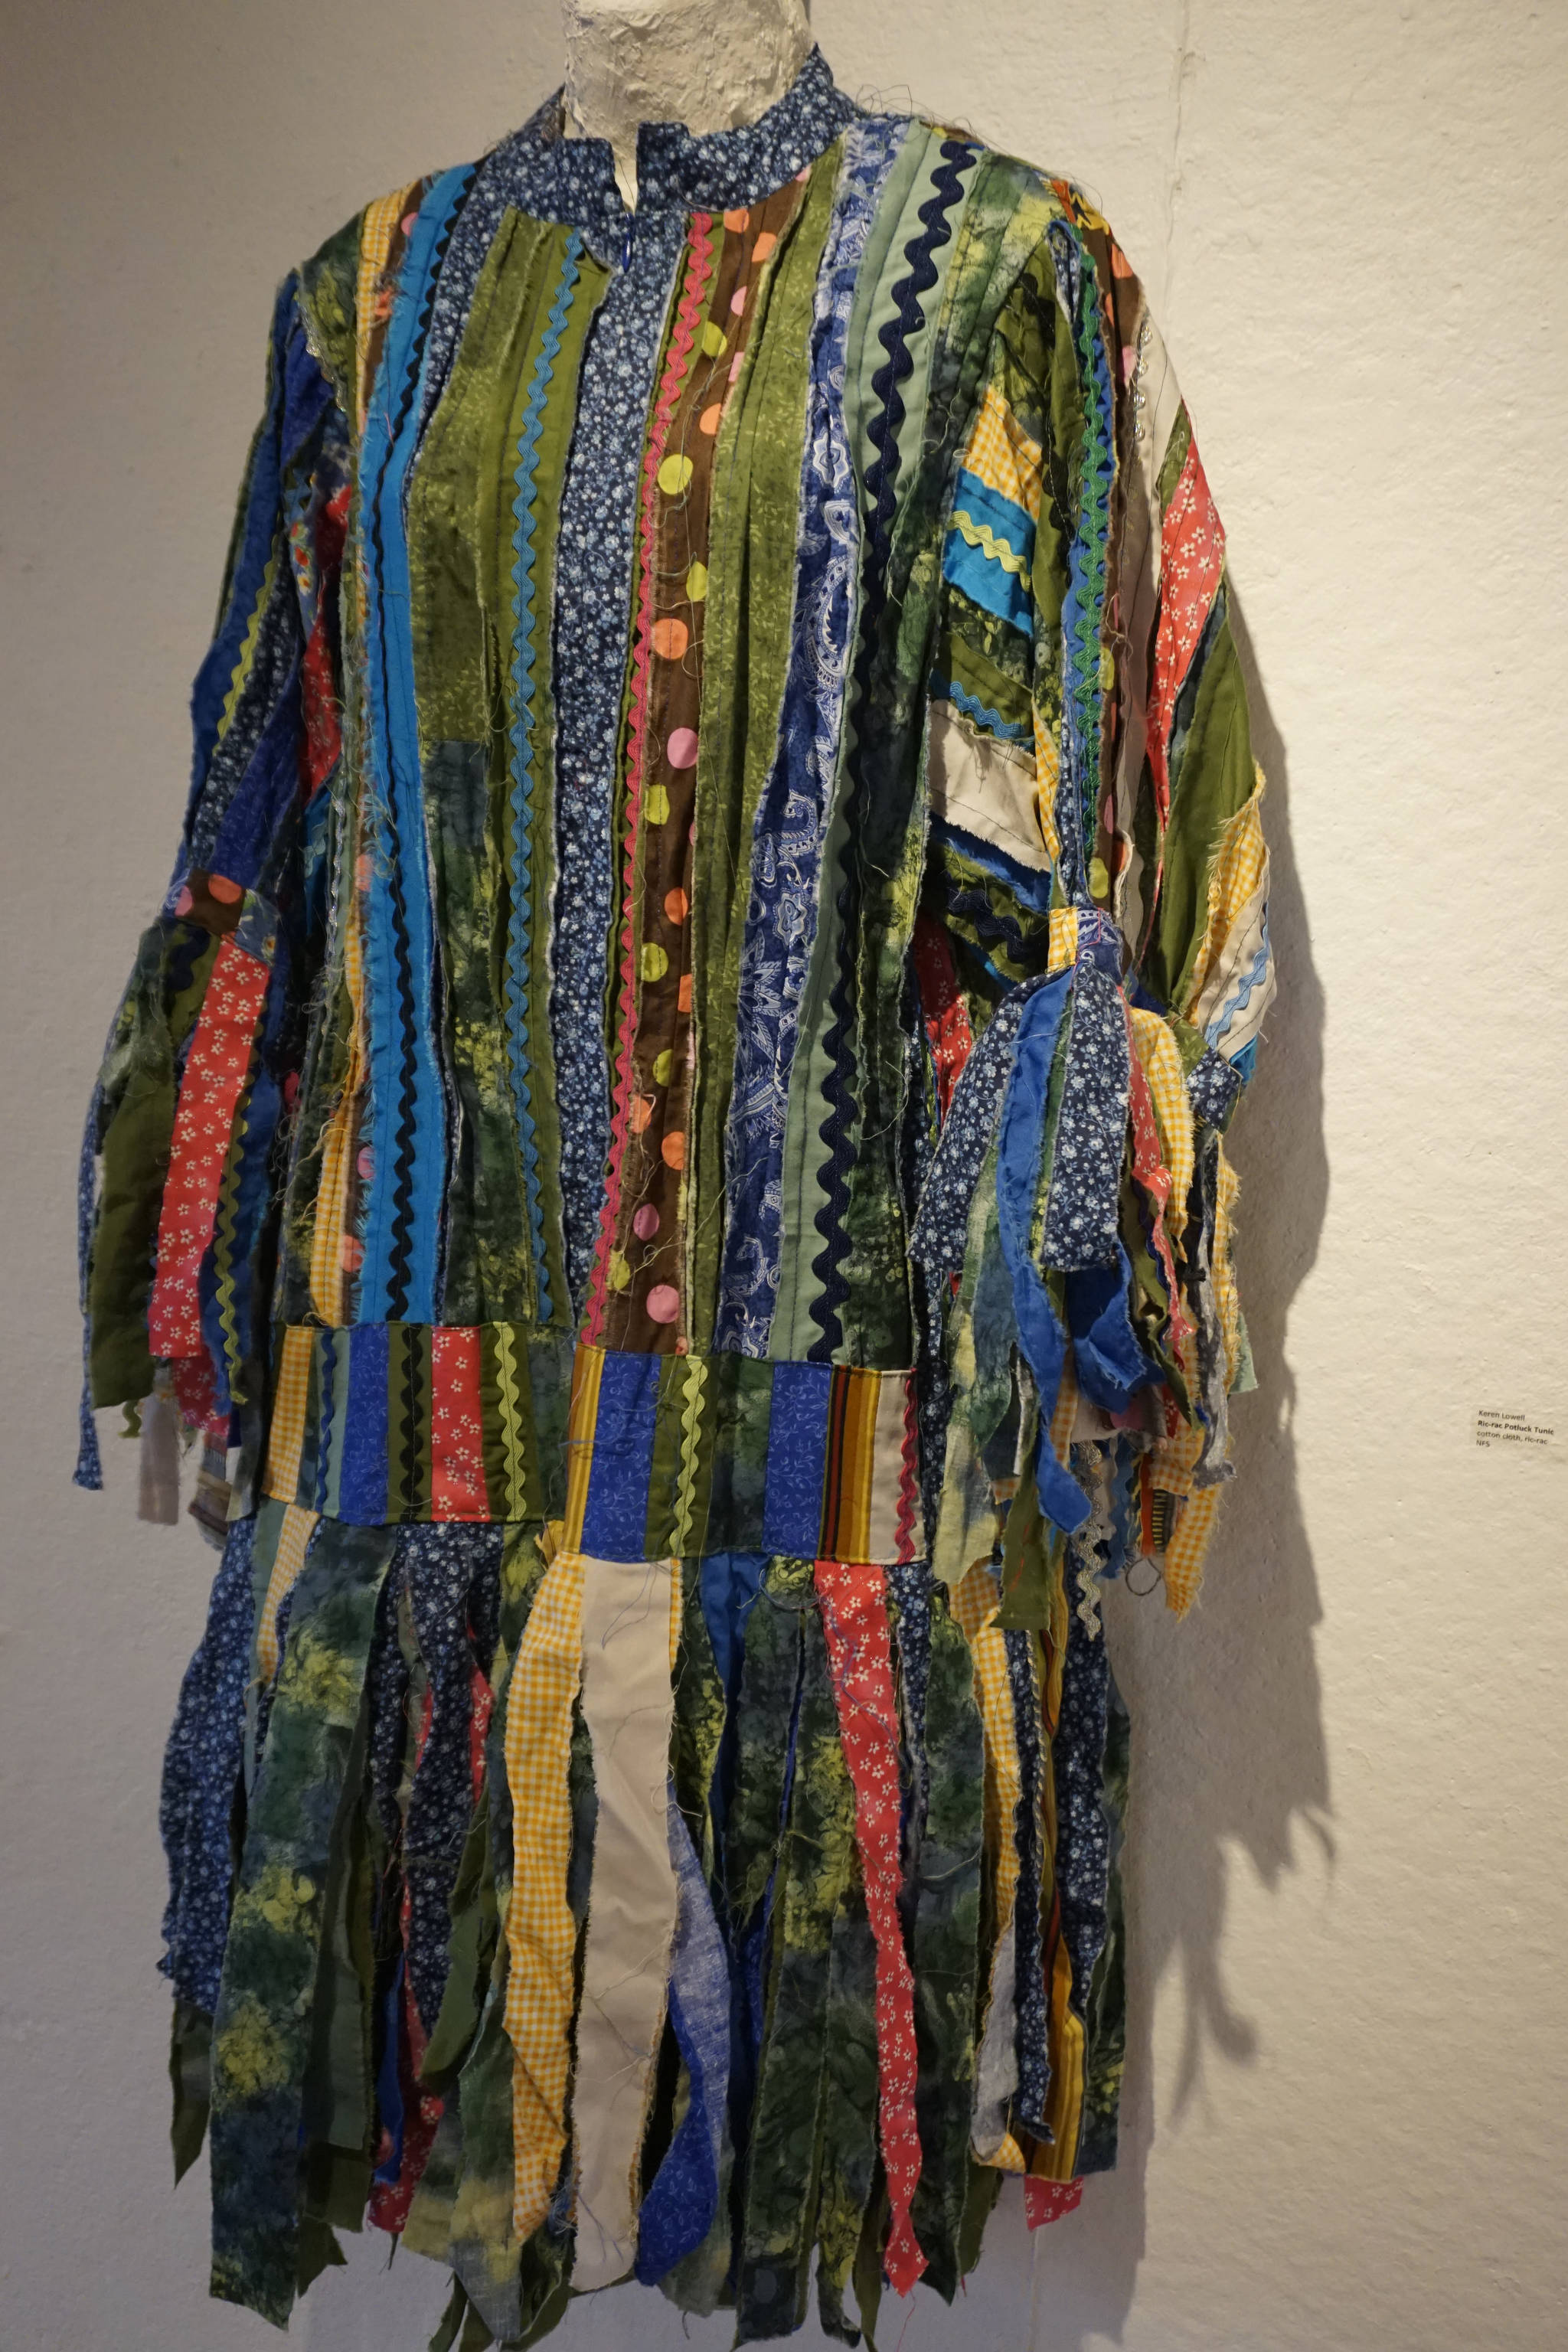 Keren Lowell’s “Ric-Rac Potluck Tunic,” part of her show at Bunnell Street Arts Center as seen at the First Friday, Oct. 6, 2018, opening in Homer, Alaska. (Photo by Michael Armstrong/Homer News)